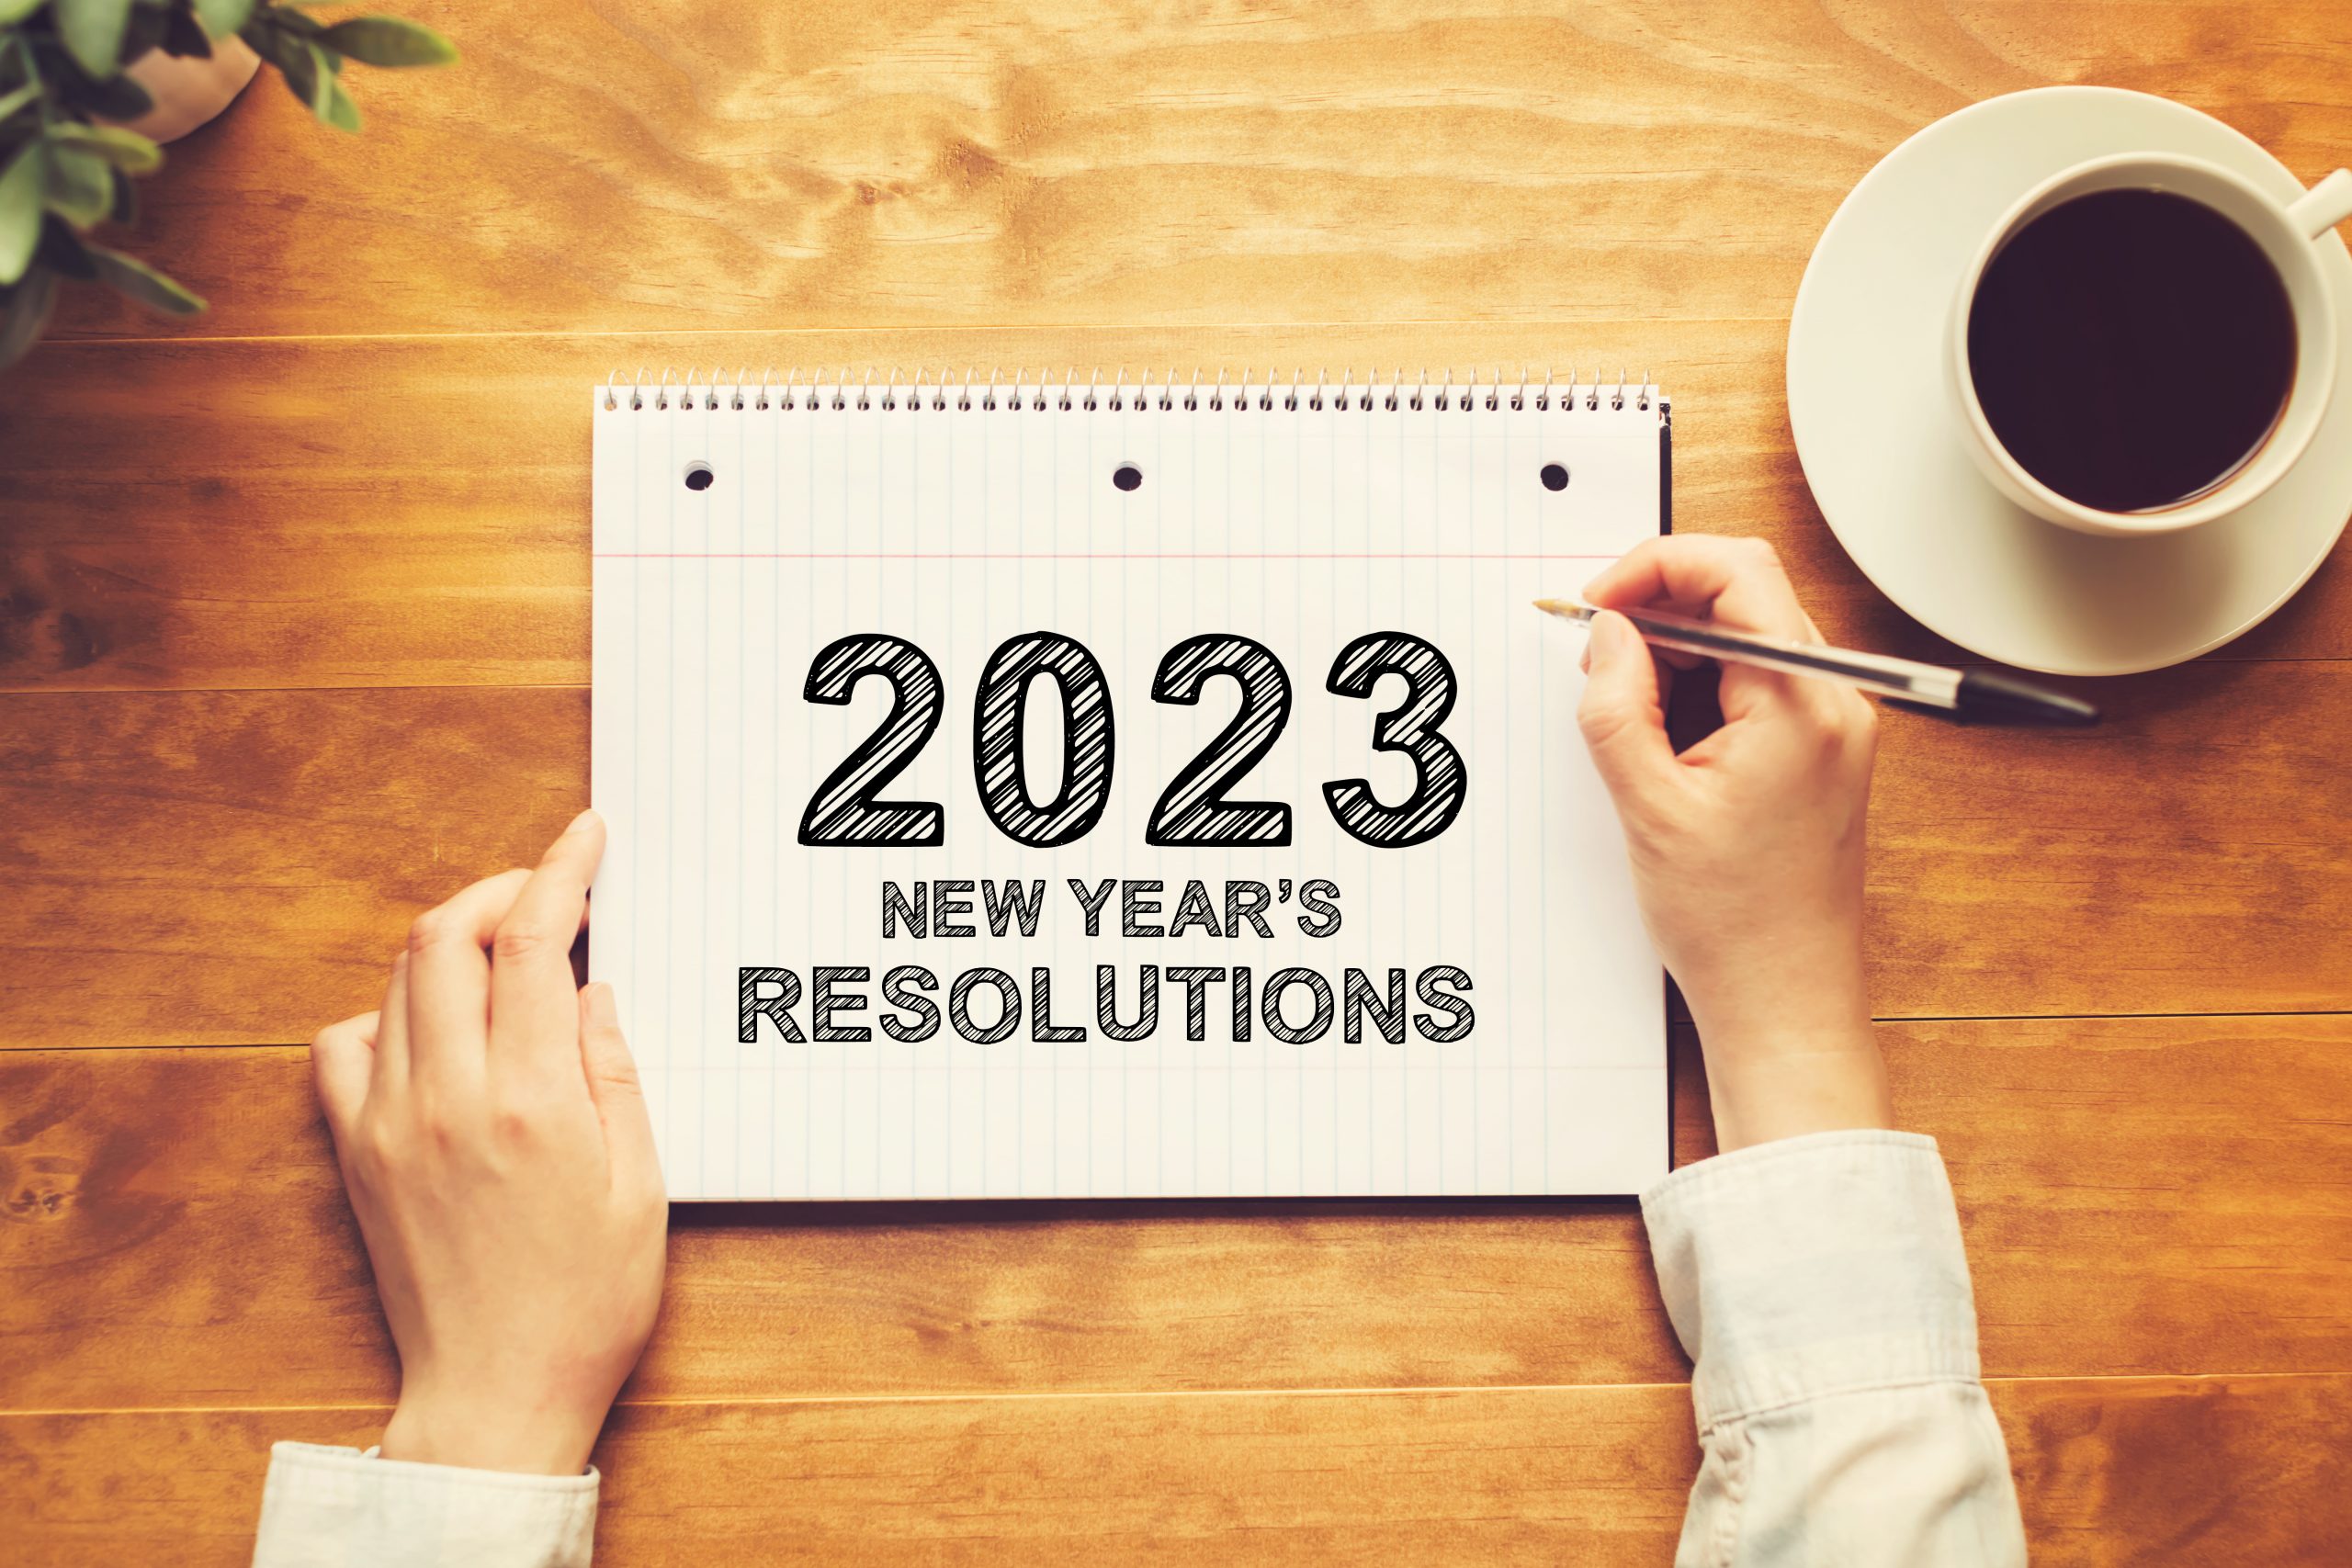 6 New Year’s Resolutions to Improve Dental Health